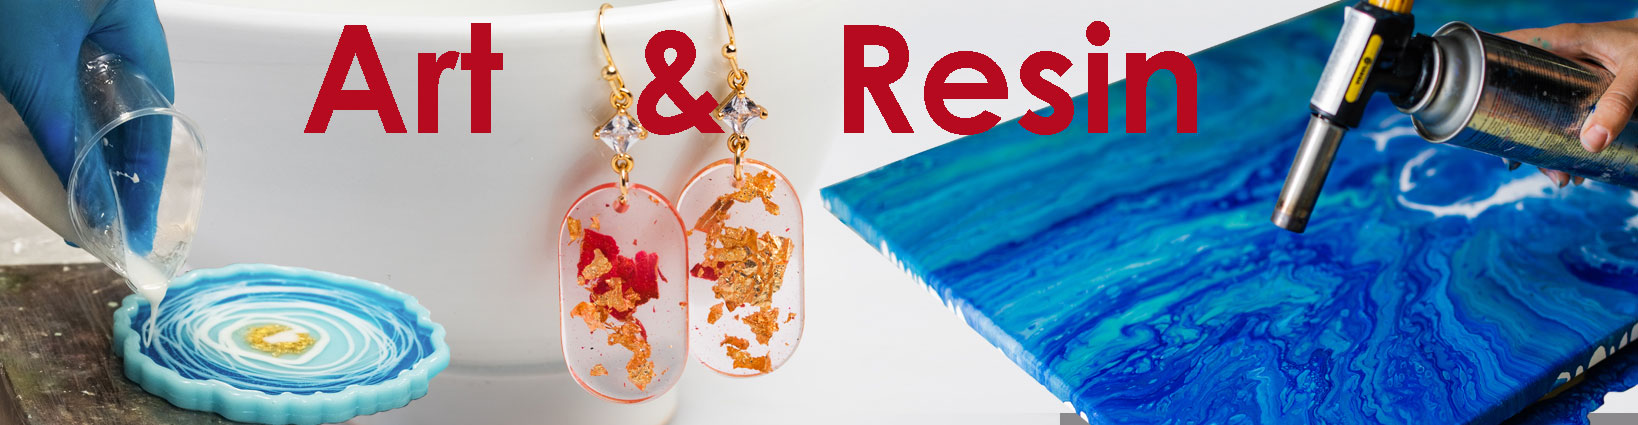 Art and Resin products